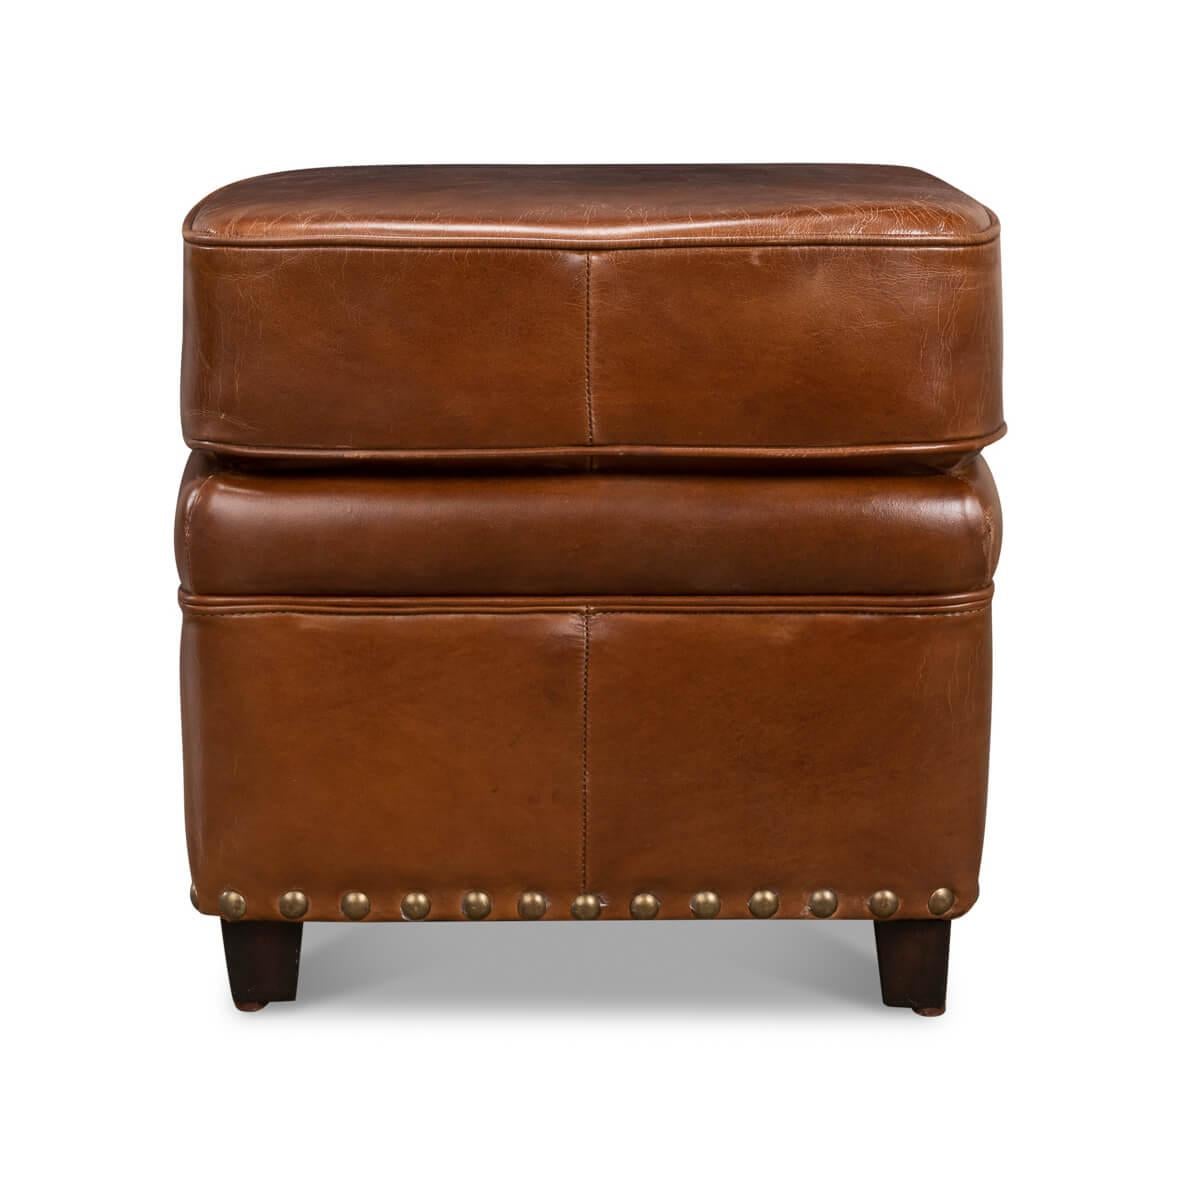 A blend of timeless design and comfort! Wrapped in a rich, caramel-hued top-grain leather, this ottoman exudes an air of classic sophistication.

Accentuated with oversized antique brass nailhead trim, the ottoman brings a dash of old-world elegance